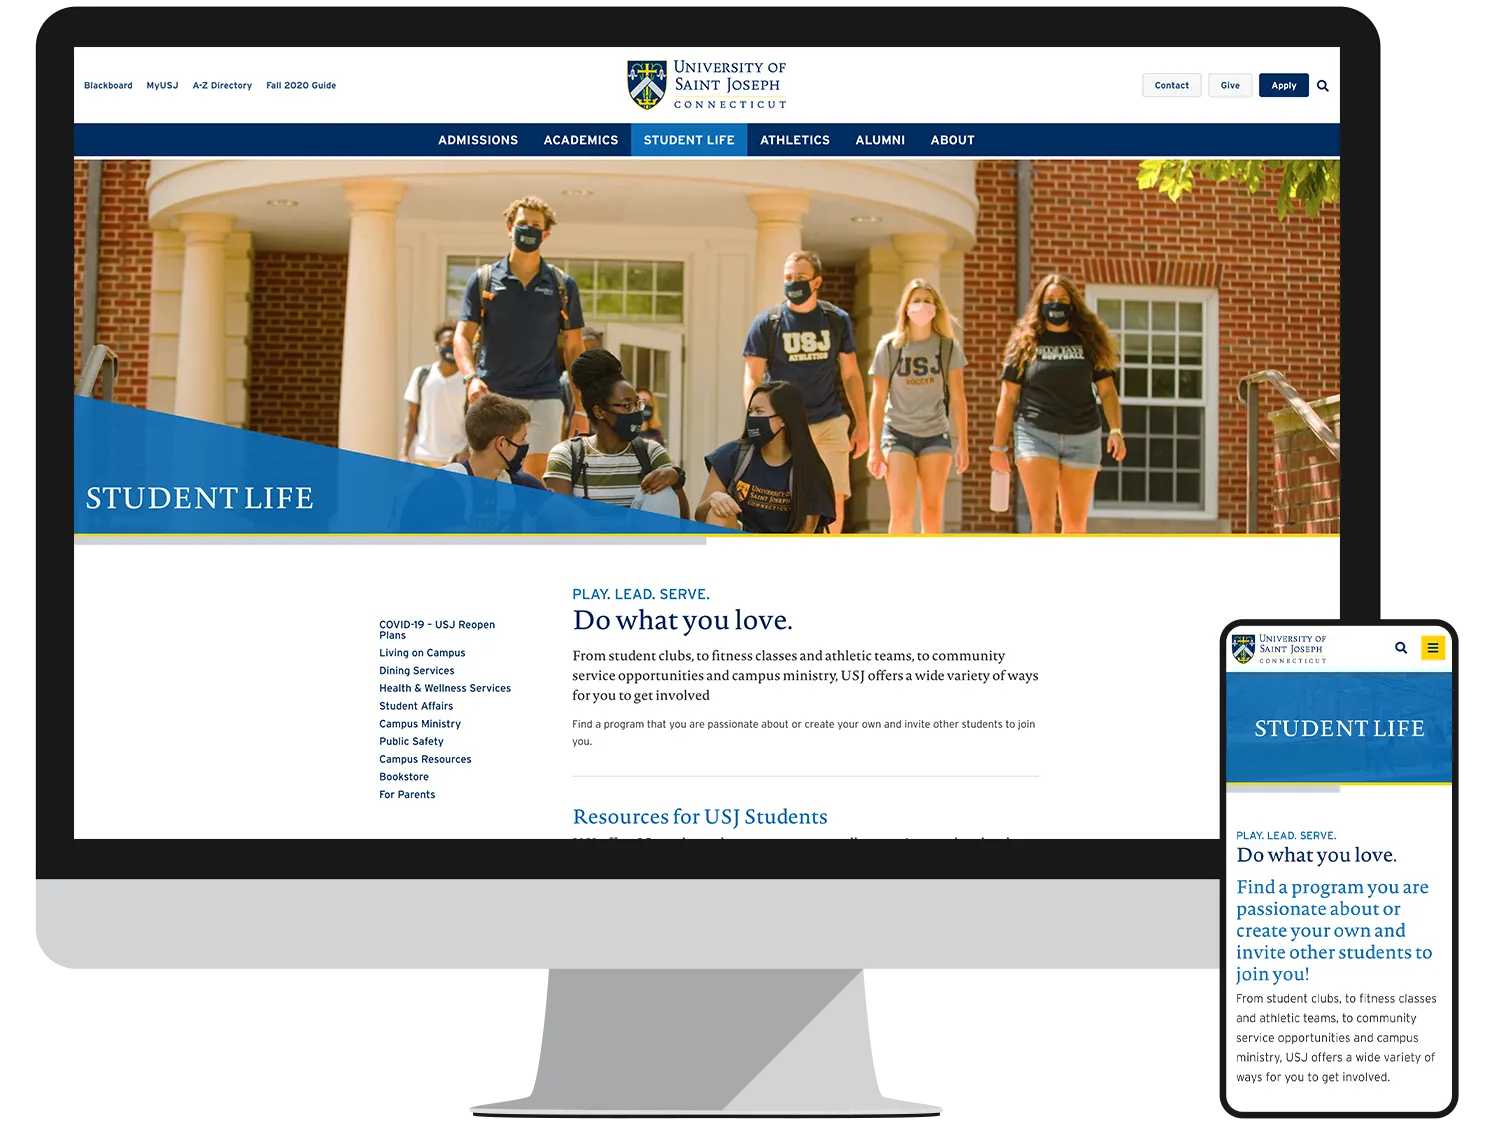 Landing Page - Student Life